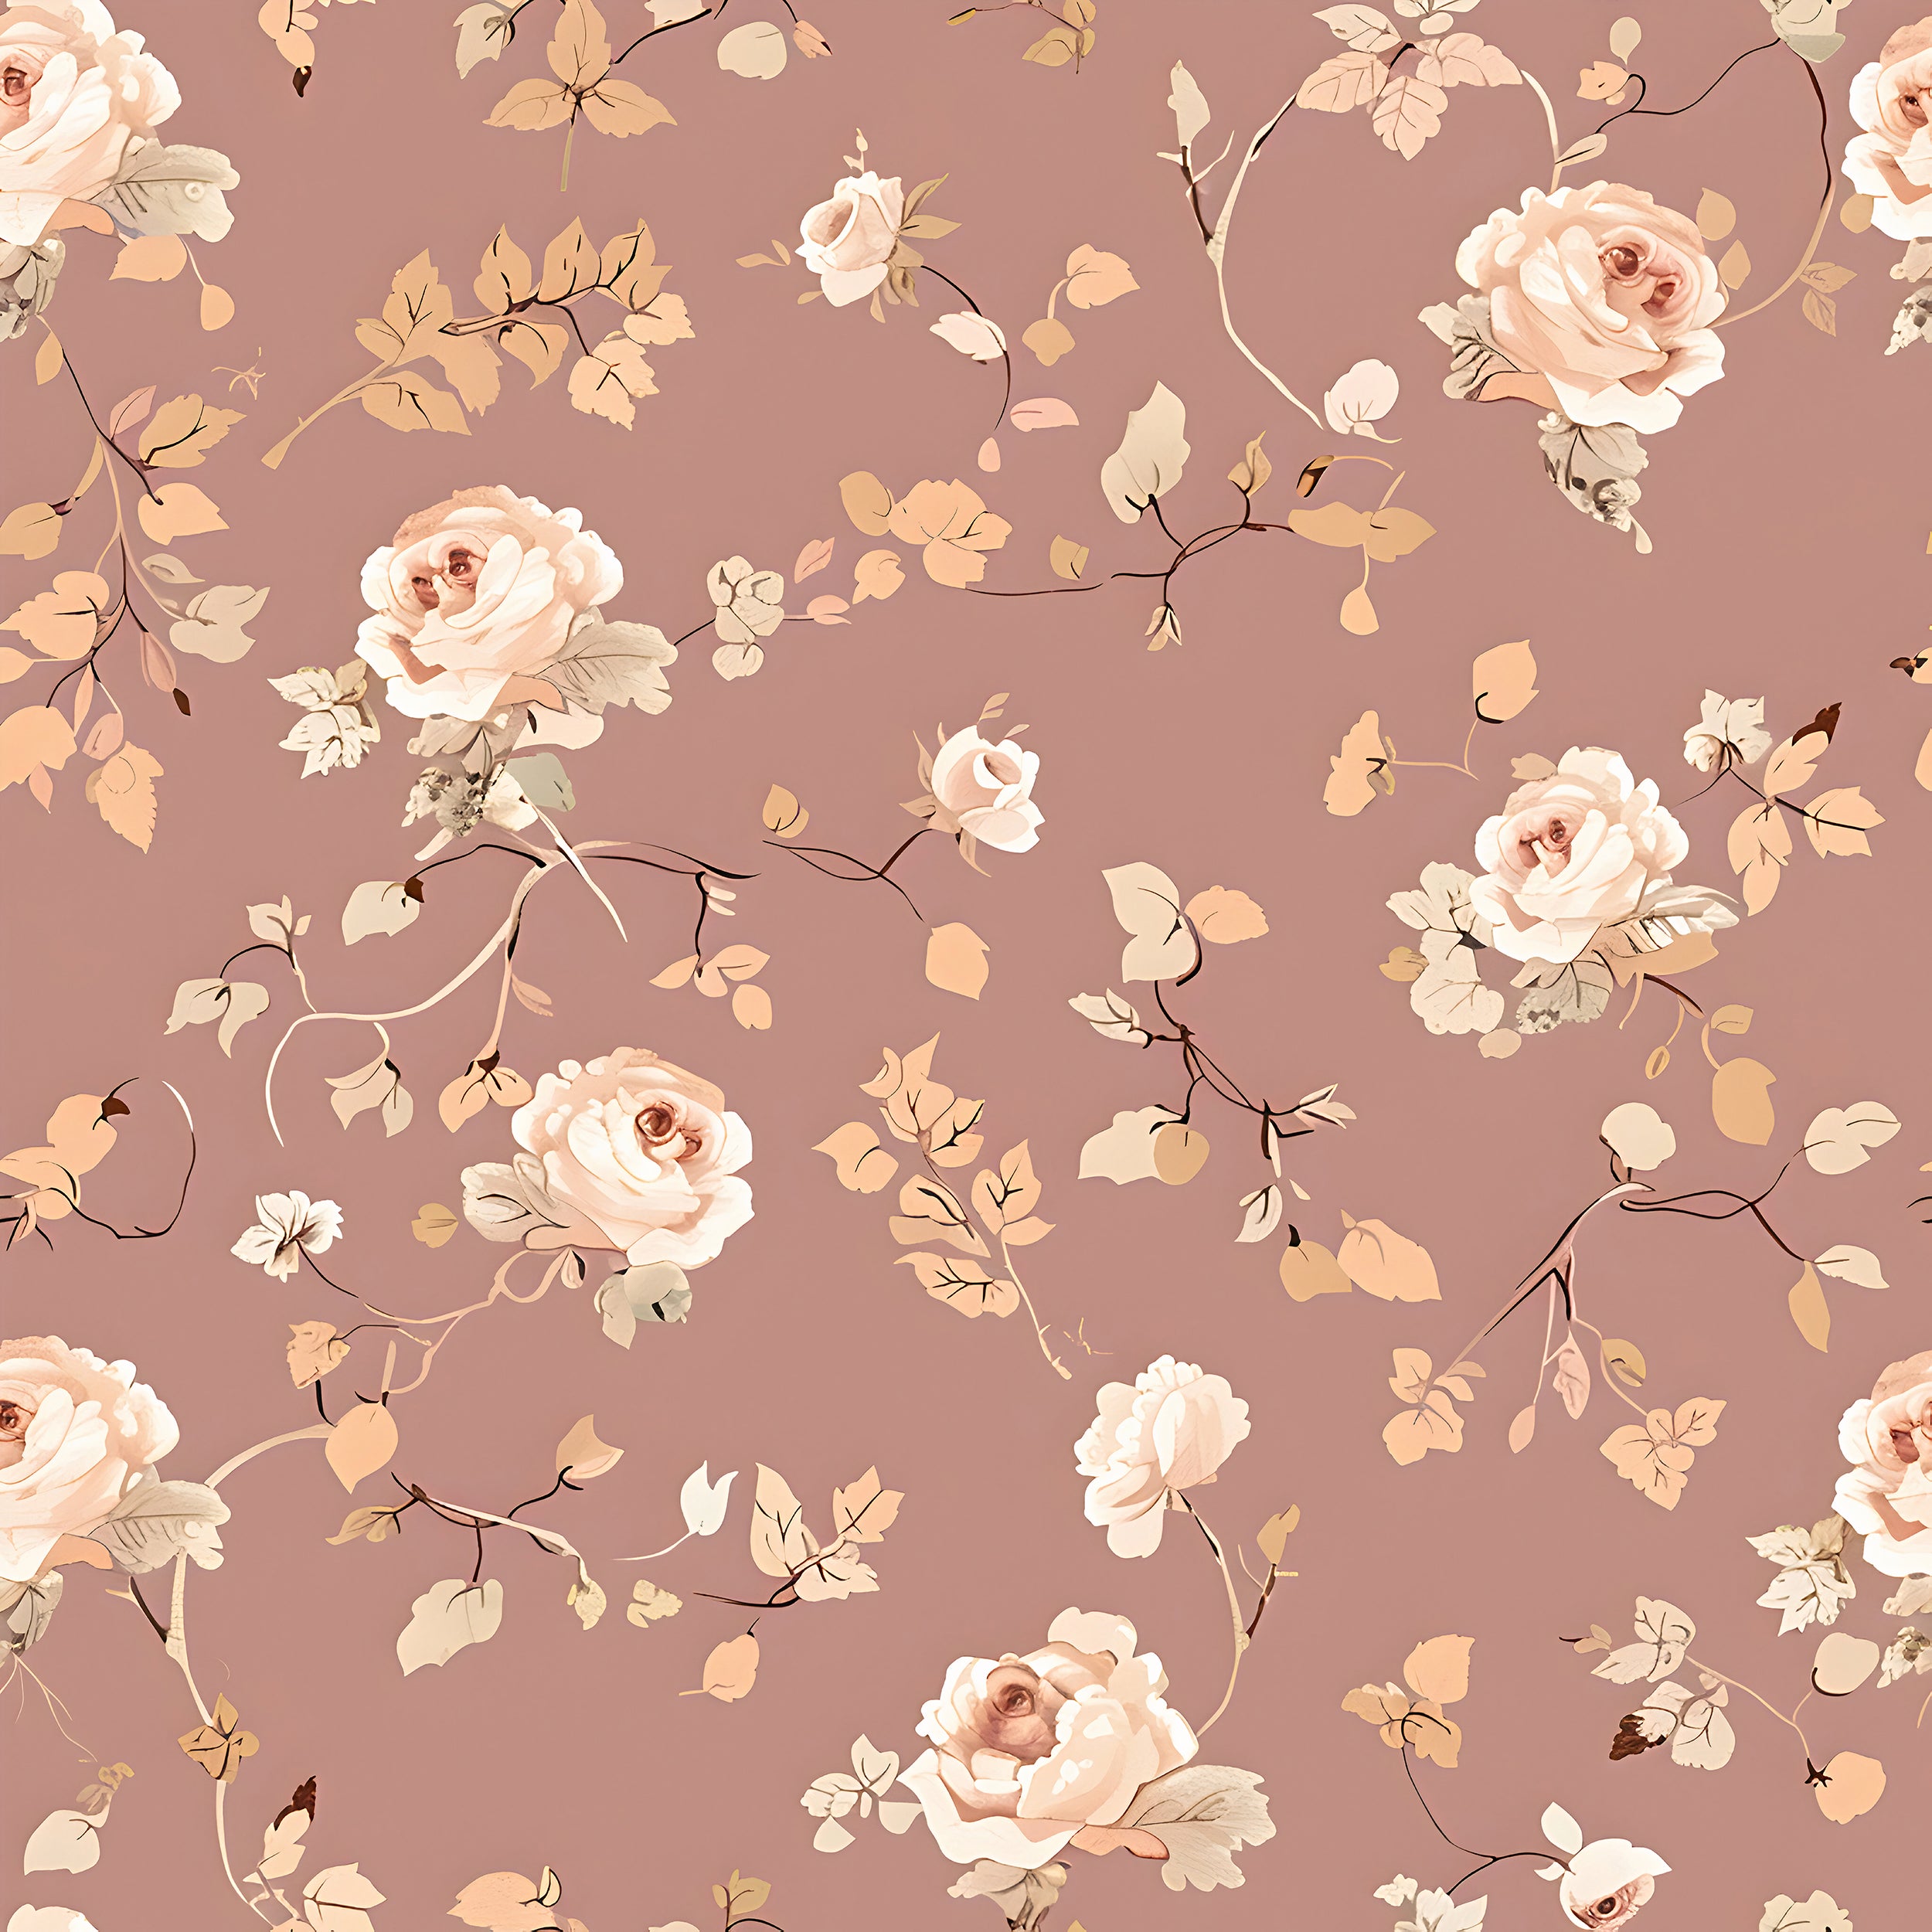 Peel and stick rose wallpaper Removable floral wall decor